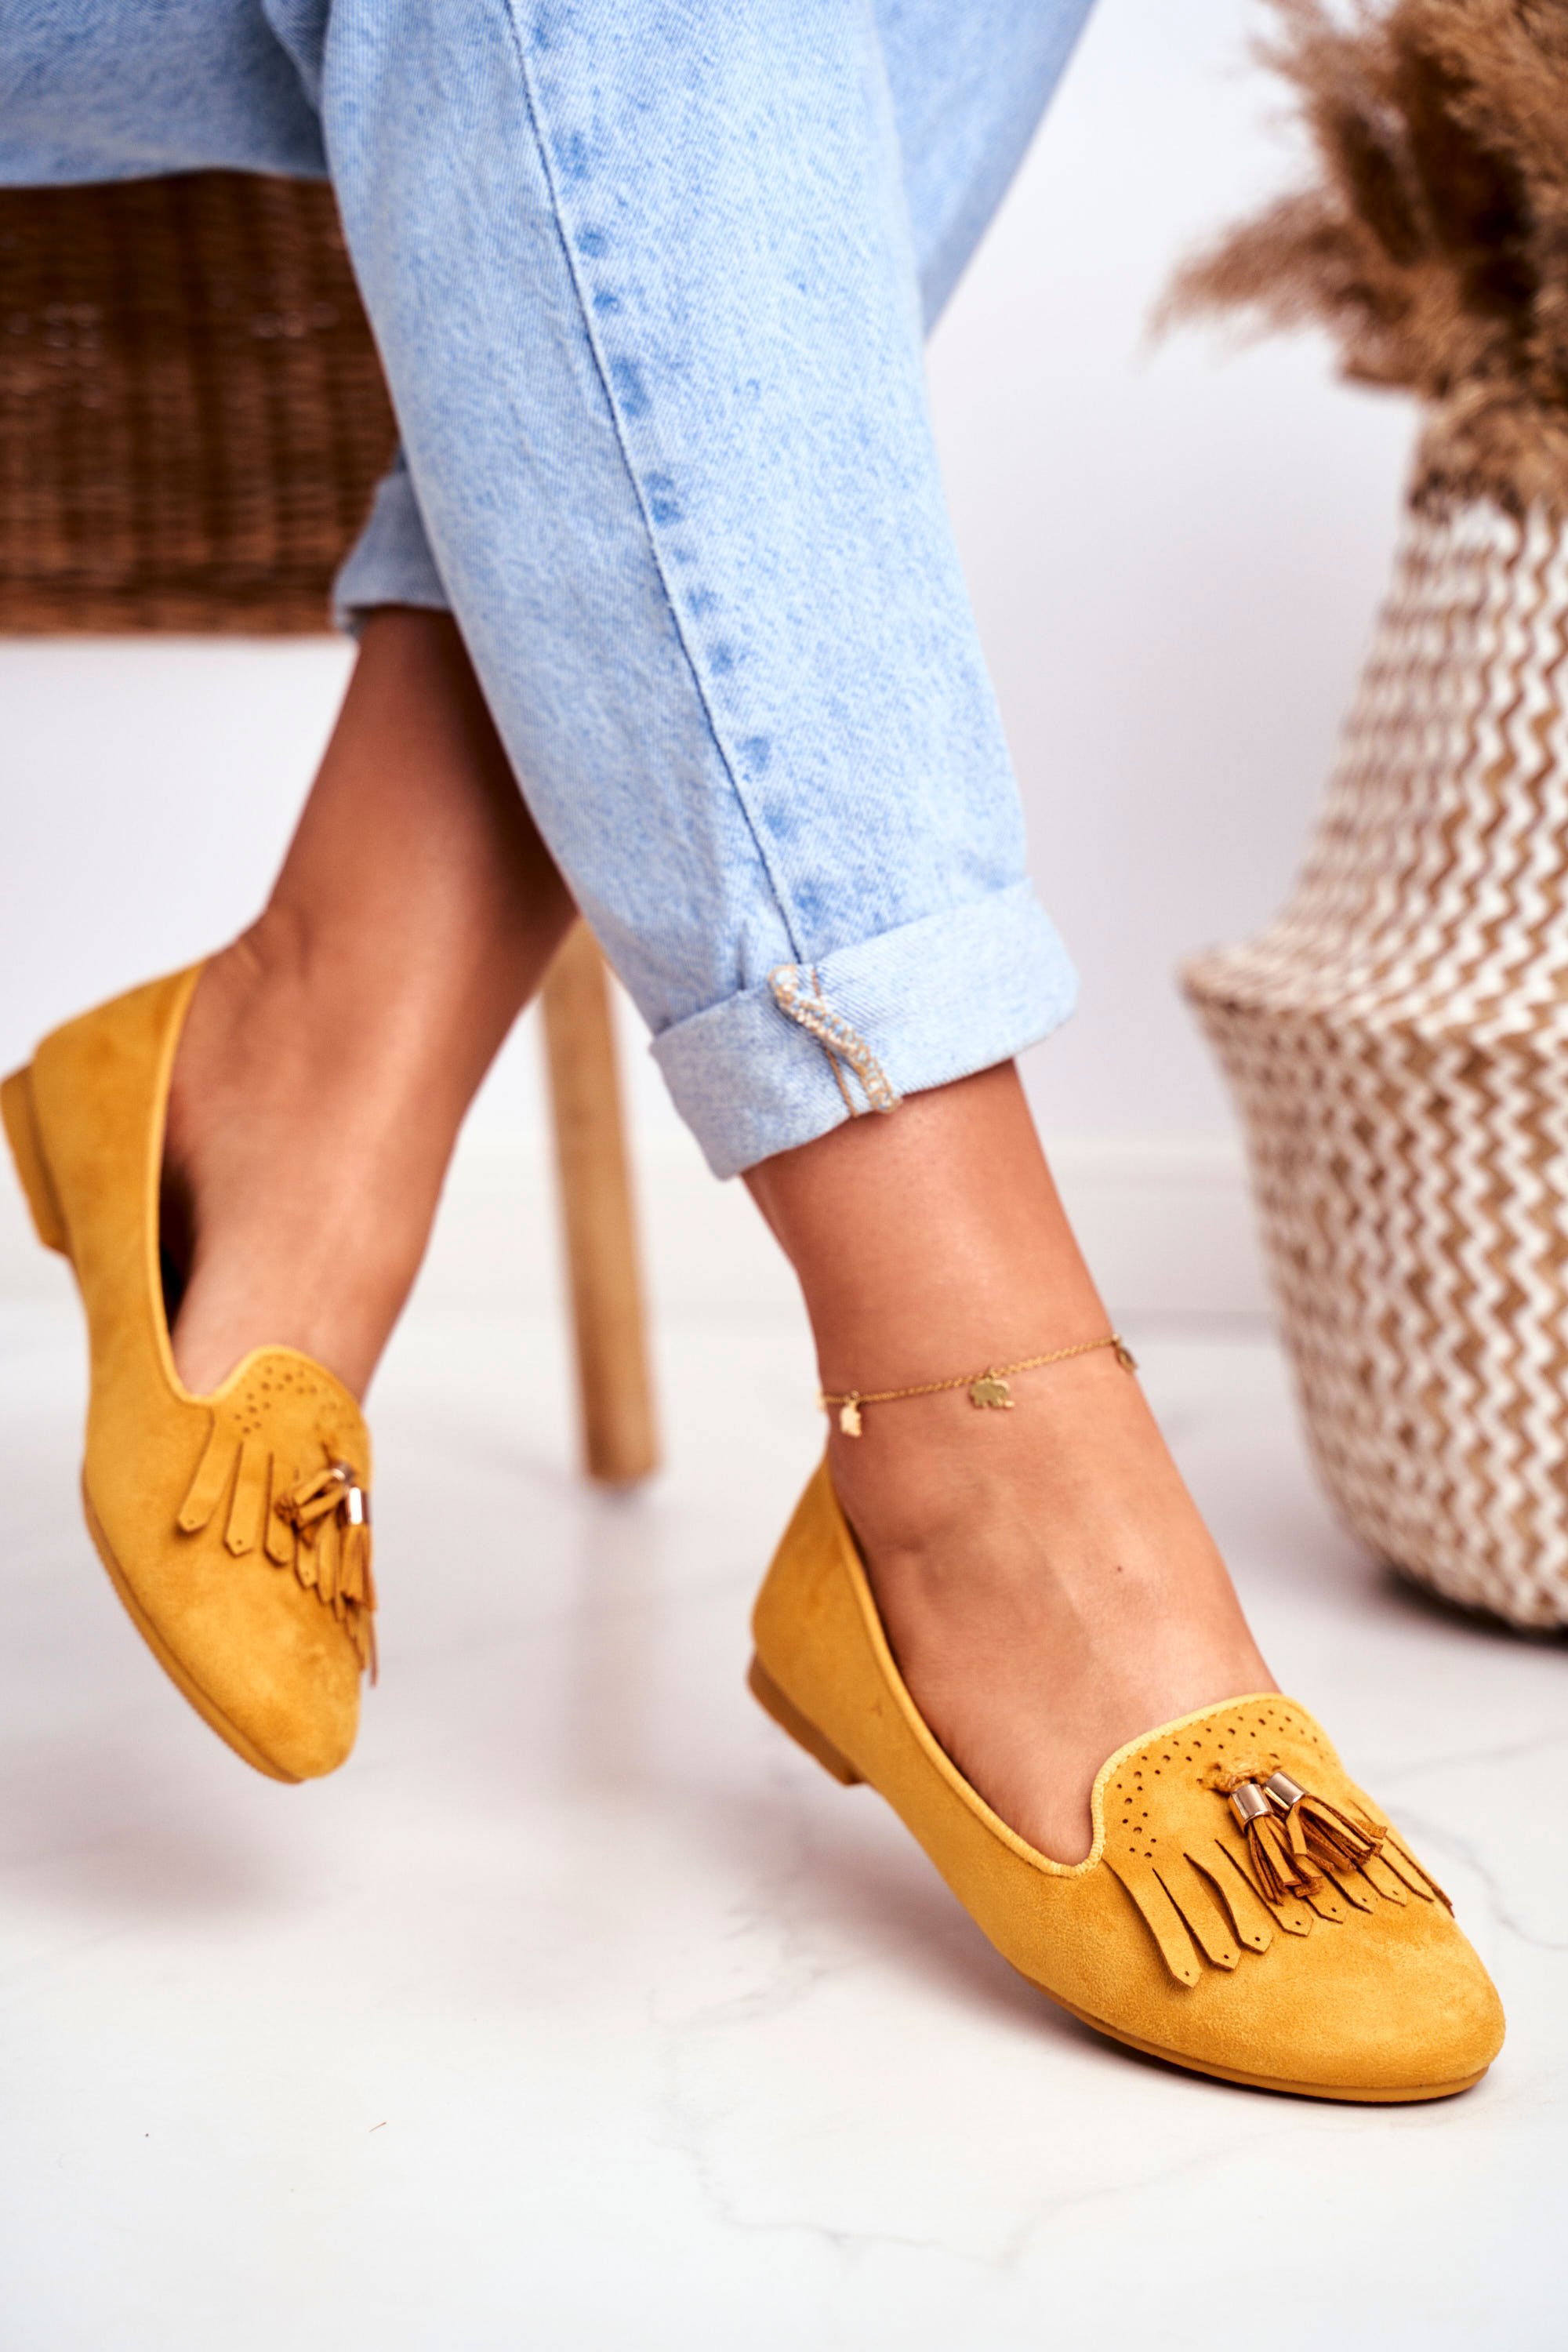 Women’s Loafers Yellow Lords Fringe Therese | Cheap and fashionable ...